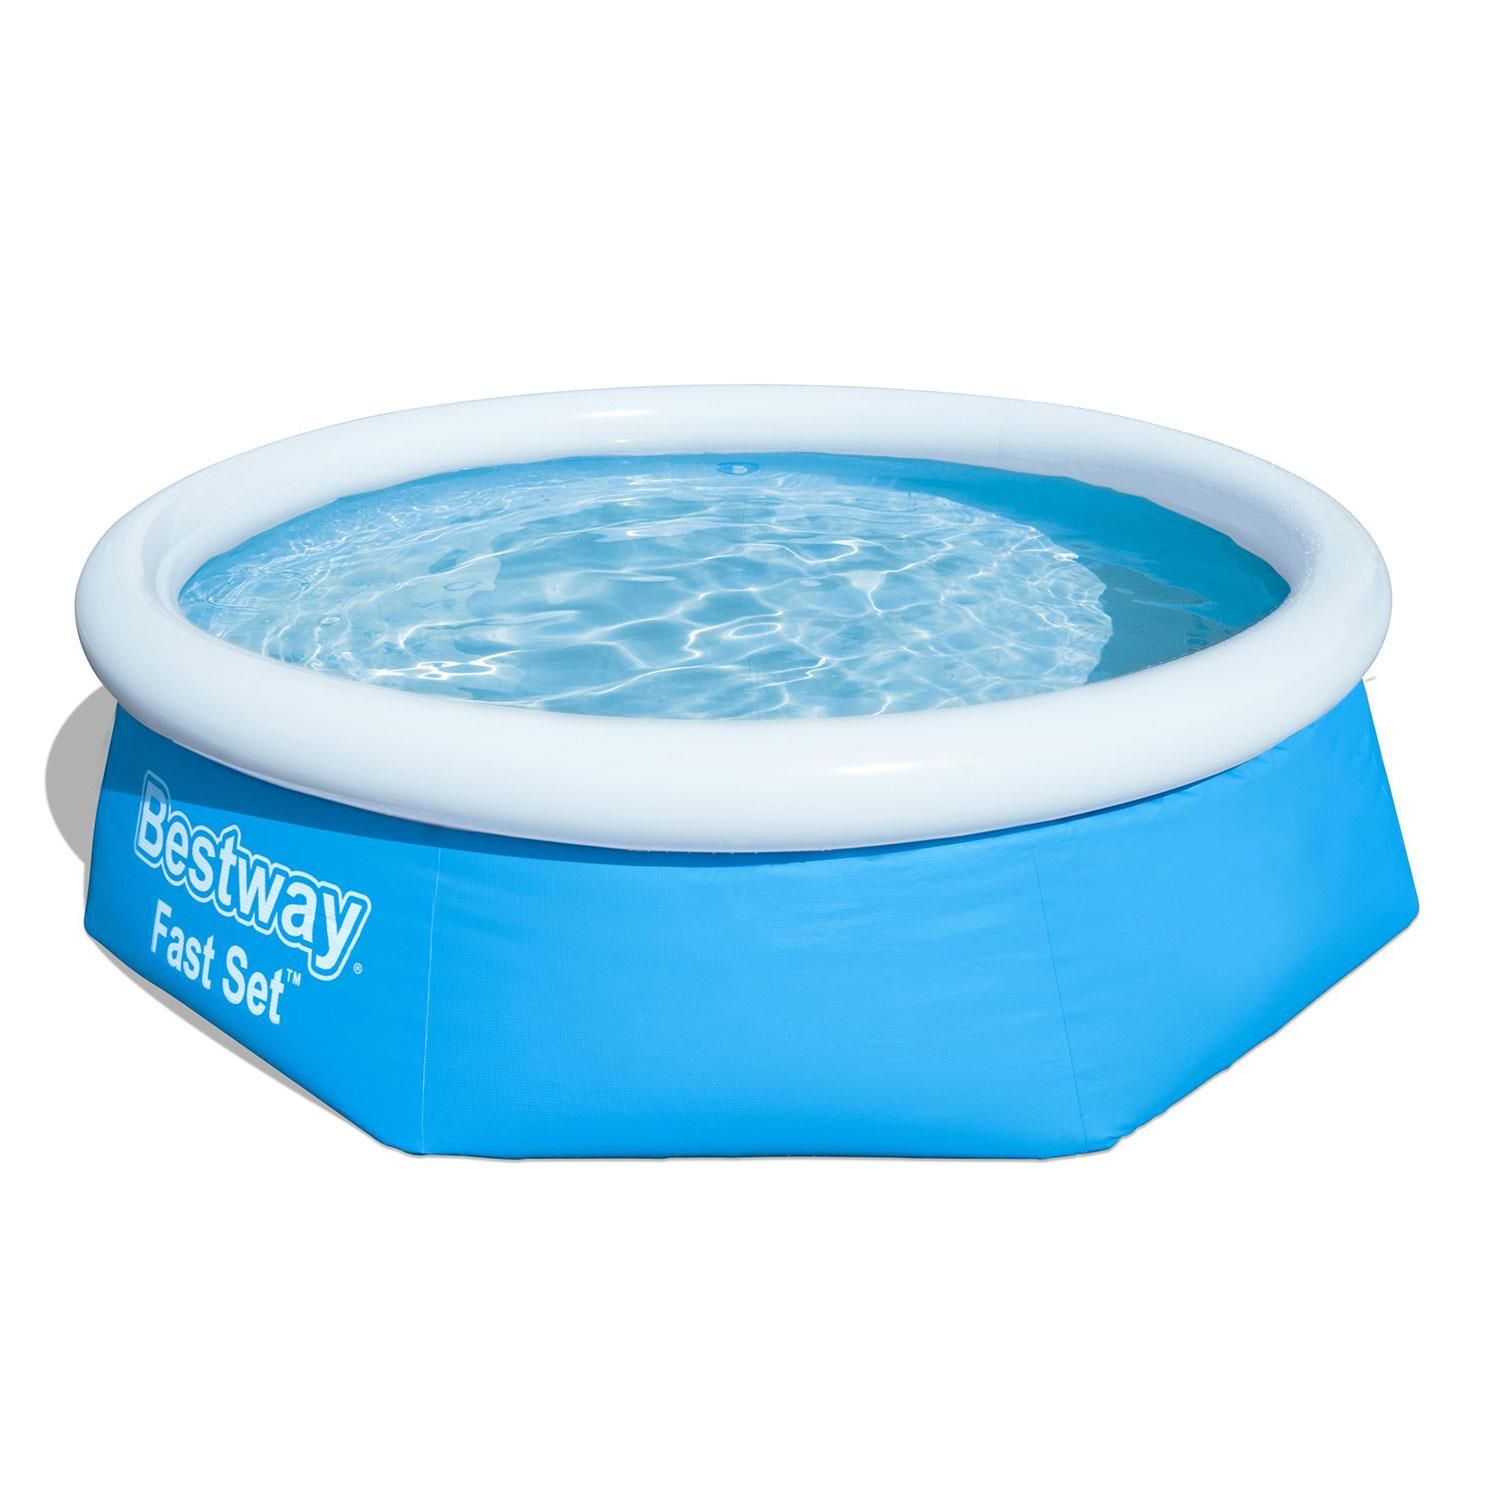 Bestway Fast Set Swimming Pool Above Ground Blue Inflatable 8ft x 26'', 2100L.  The 8' x 26'' / 2.44m x 66cm Fast Set Pool by Bestway is a great family swimming pool. It sets up in only a matter of minutes on a flat surface as only the top ring needs inflated; the body of the pool has a liner that lifts when you fill the pool with water. It also comes with a flow control drain valve, allowing it to be drained quickly at the end of the season. The Fast Set Pool is constructed of tough Tritech material, making it extremely durable and guarantees to keep the family swimming for years to come!

Features :
Water capacity (80%): 2,100 L (555 gal.)
Easy set up
Heavy-duty PVC and polyester 3-ply side walls
Liner is supported by an inflatable top ring
Select a level surface, inflate top ring and the pool will rise as it’s filled with water
Built-in flow control drain valve makes it easy to drain by attaching the valve to a garden hose (with included adapter) to drain away water
Easy to take down for off-season storage
Pool is equipped with fittings for compatibility with Flowclear filter pumps
Underwater adhesive repair patch
The extra strong side walls of this pool are constructed with Tritech, a 3 layer reinforced material with a polyester mesh core encased between two layers of high gauge PVC material. This creates a total thickness of 0.40-0.80mm (16-32 gauge) depending on the size of the pool, offering superior strength and durability

Box Contains :
1 x Fast Set 8' x 26